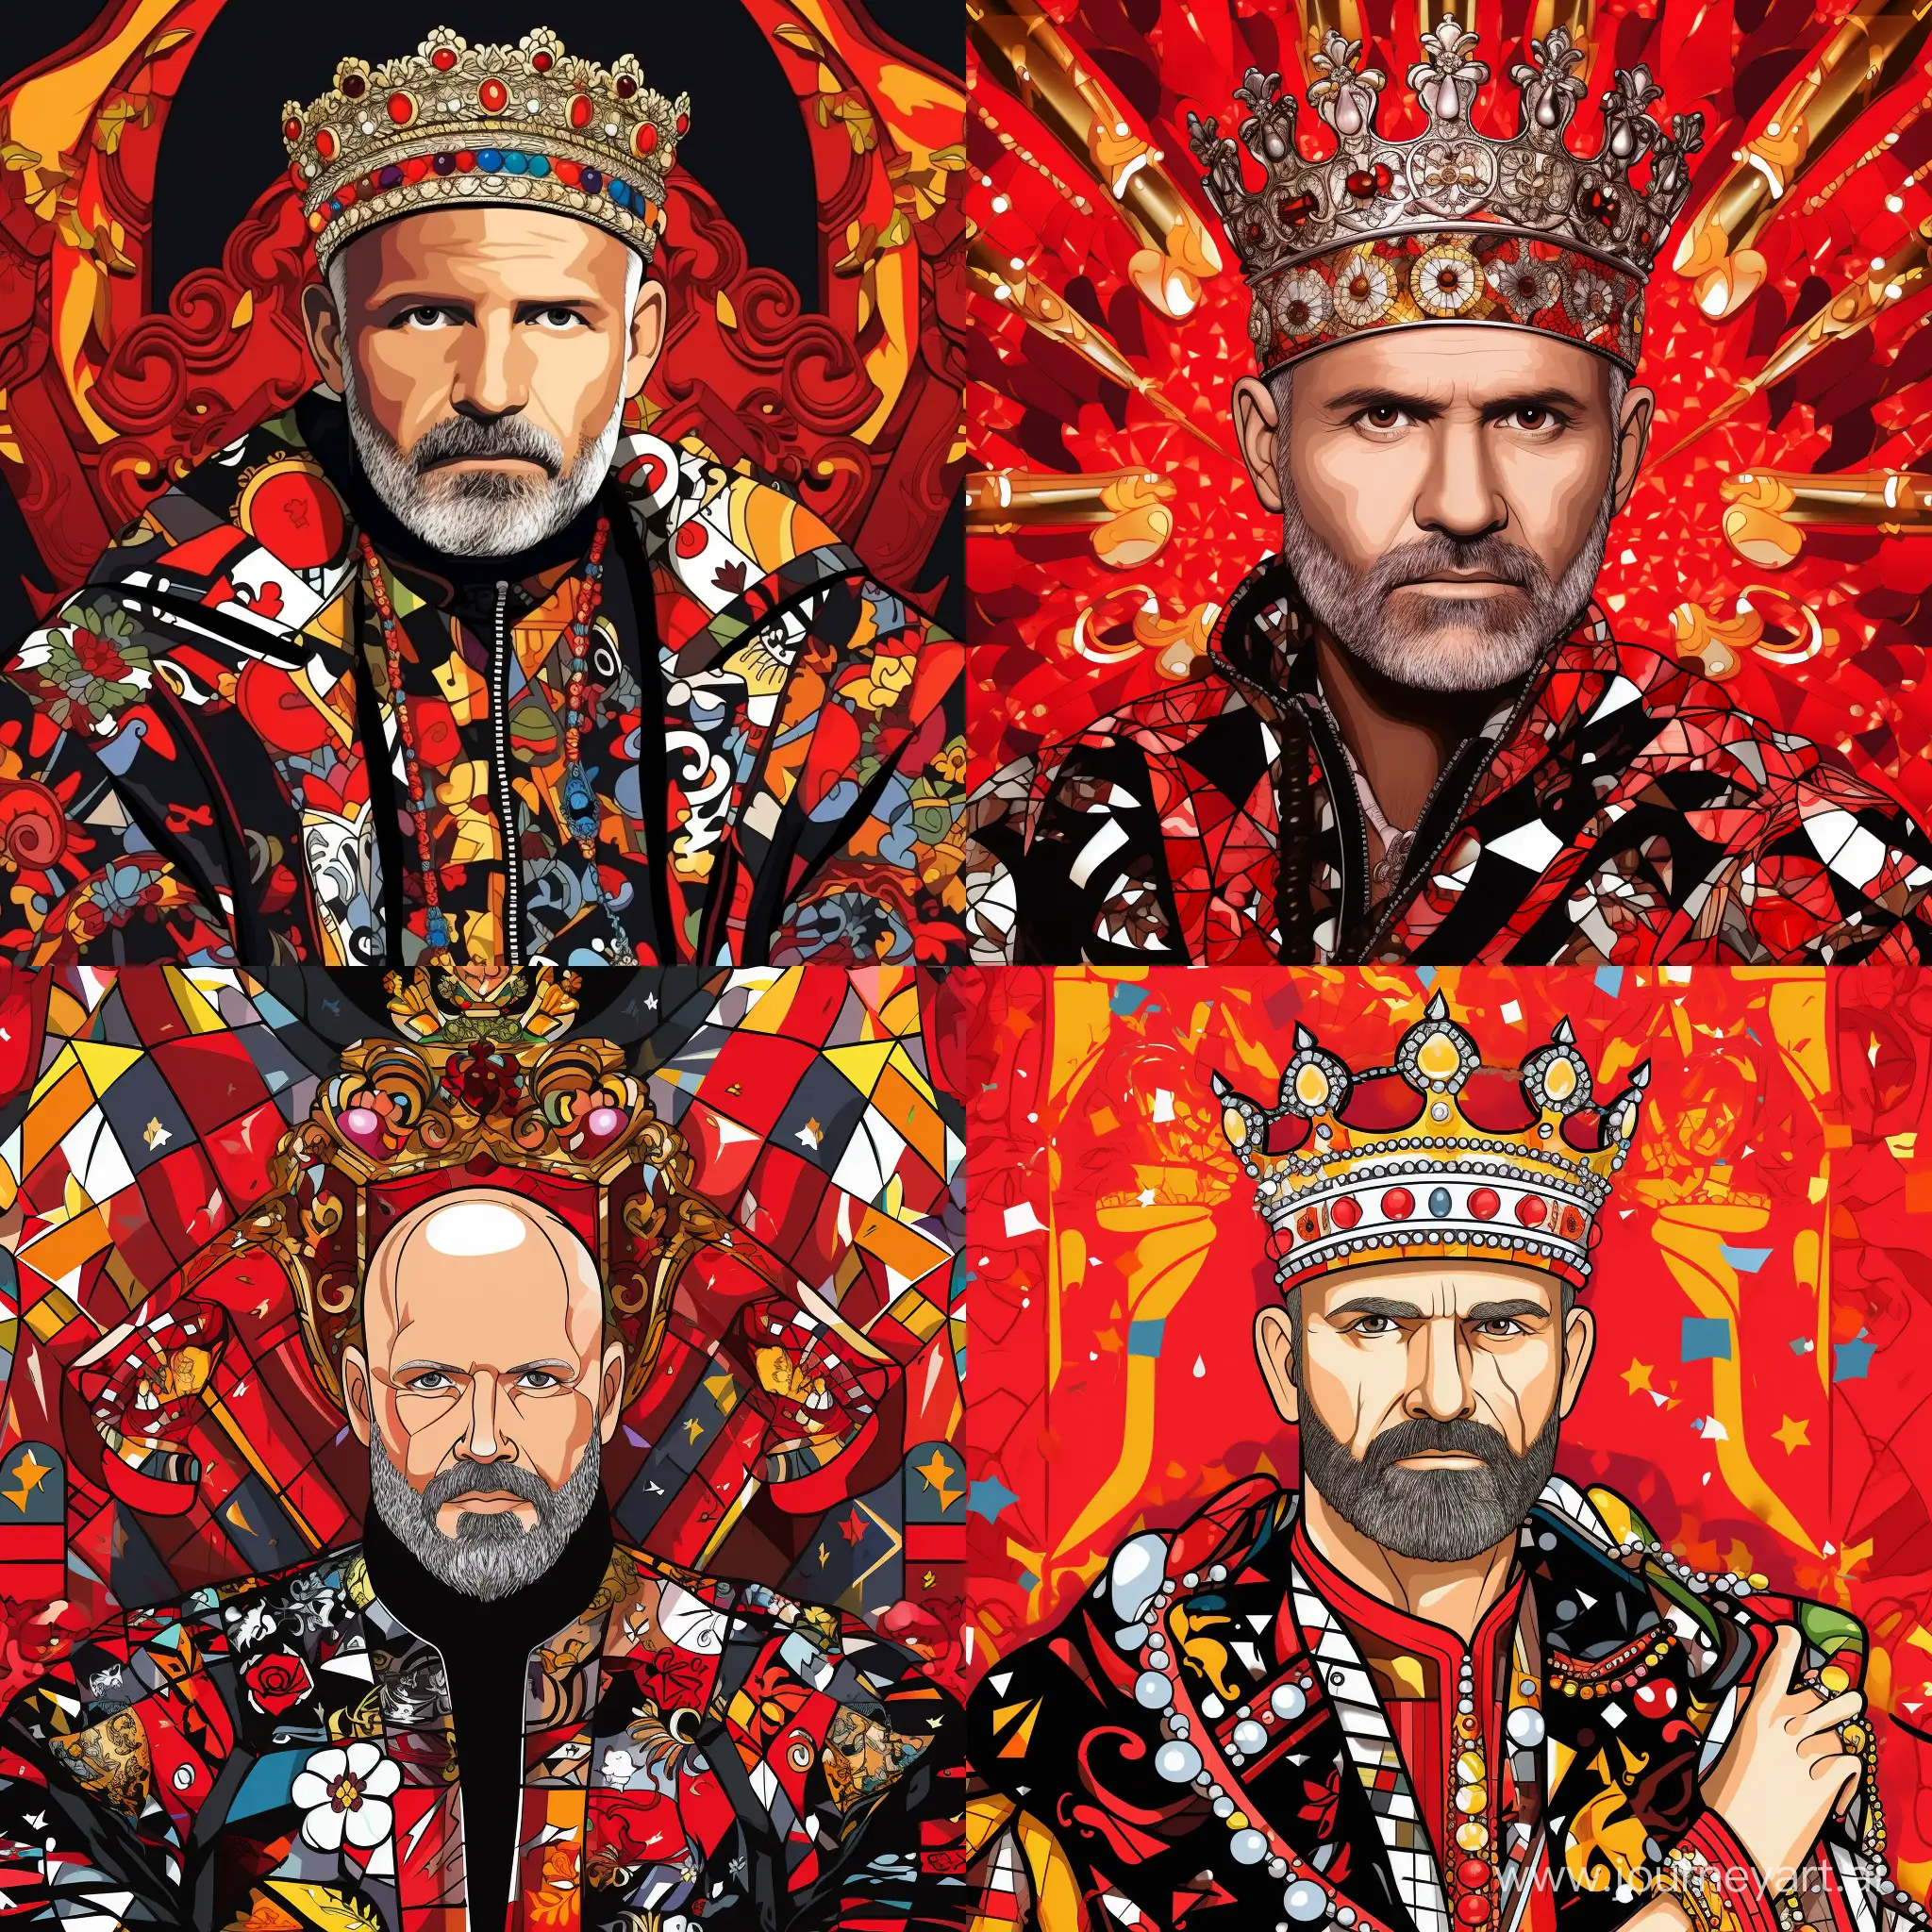 Fashion-Icon-Gianni-Versace-Portrait-with-Crown-and-Versace-Accents